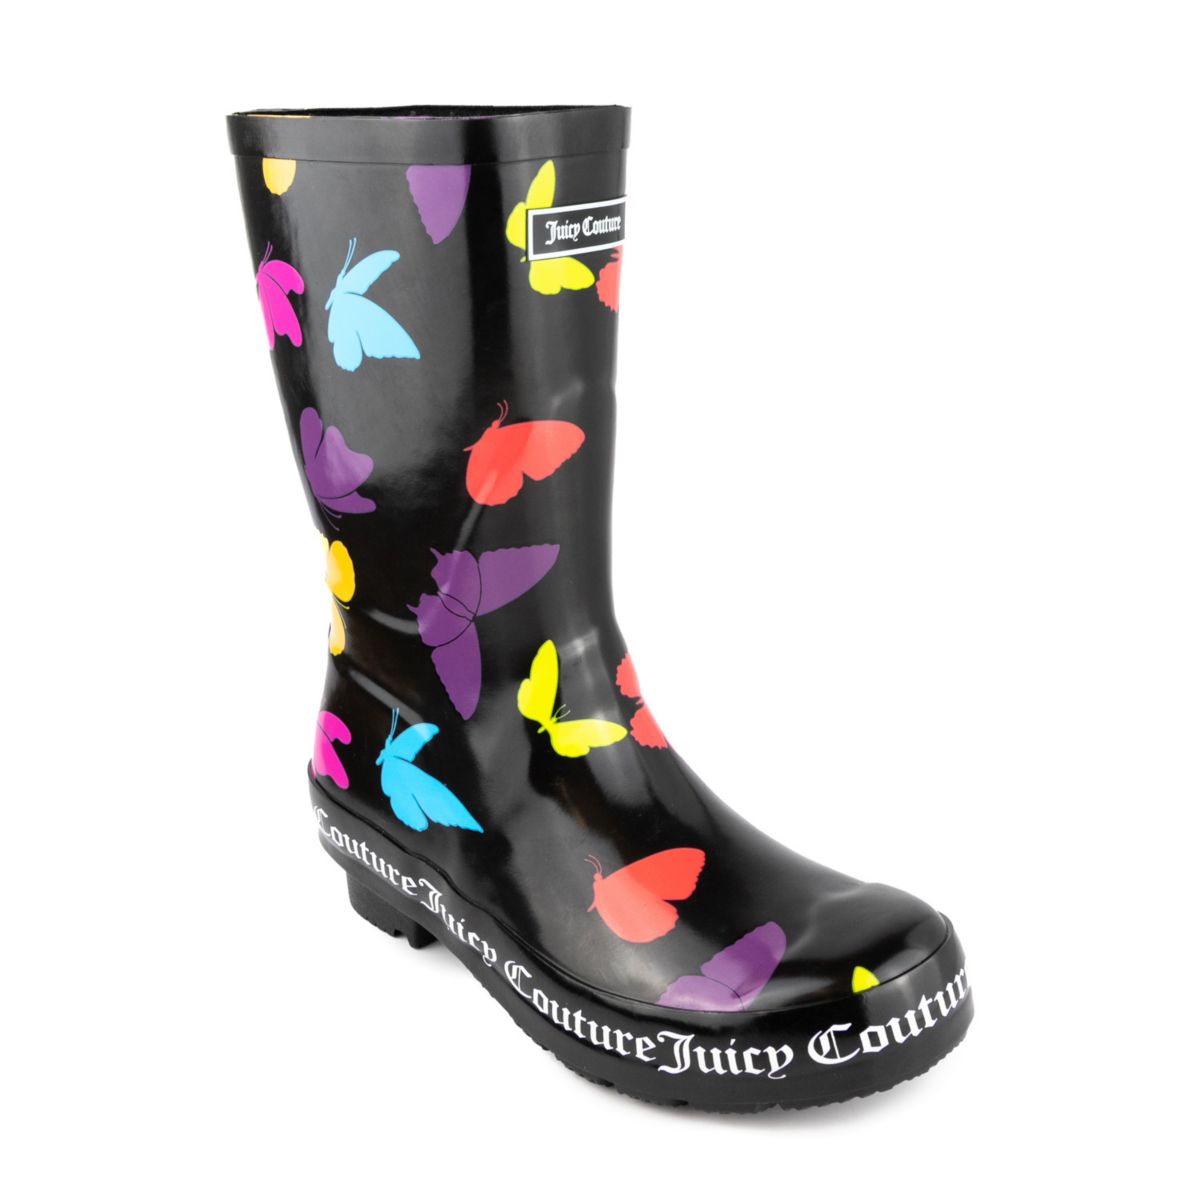 Женские сапоги Juicy Couture Totally Boots Juicy Couture